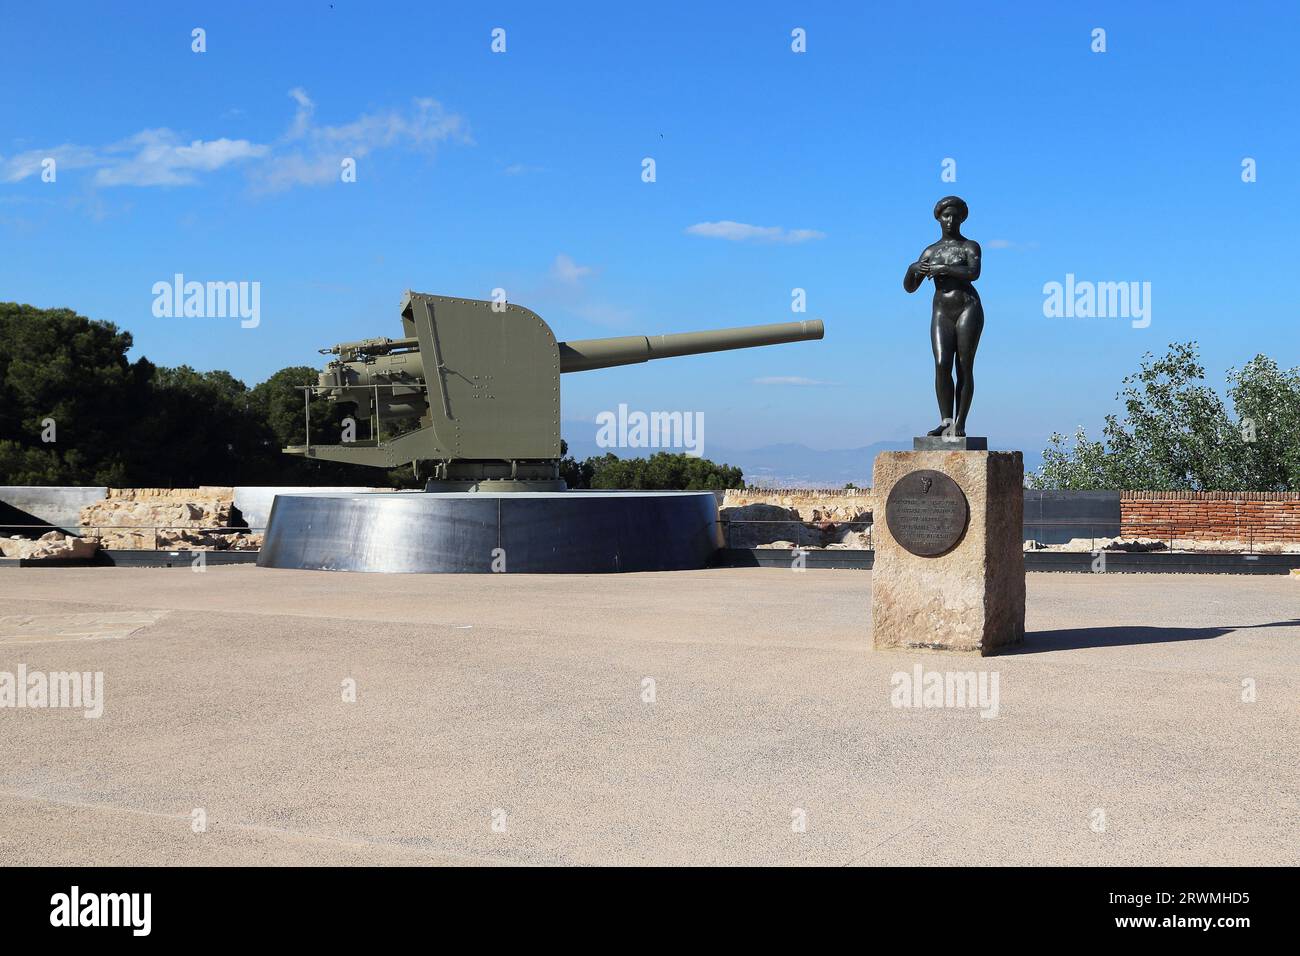 BARCELONA, SPAIN - MAY 11, 2017: This is a naval cannon on the bastion of San Carlos of the Montjuic castle and the  Gaspard de Portol's monument. Stock Photo